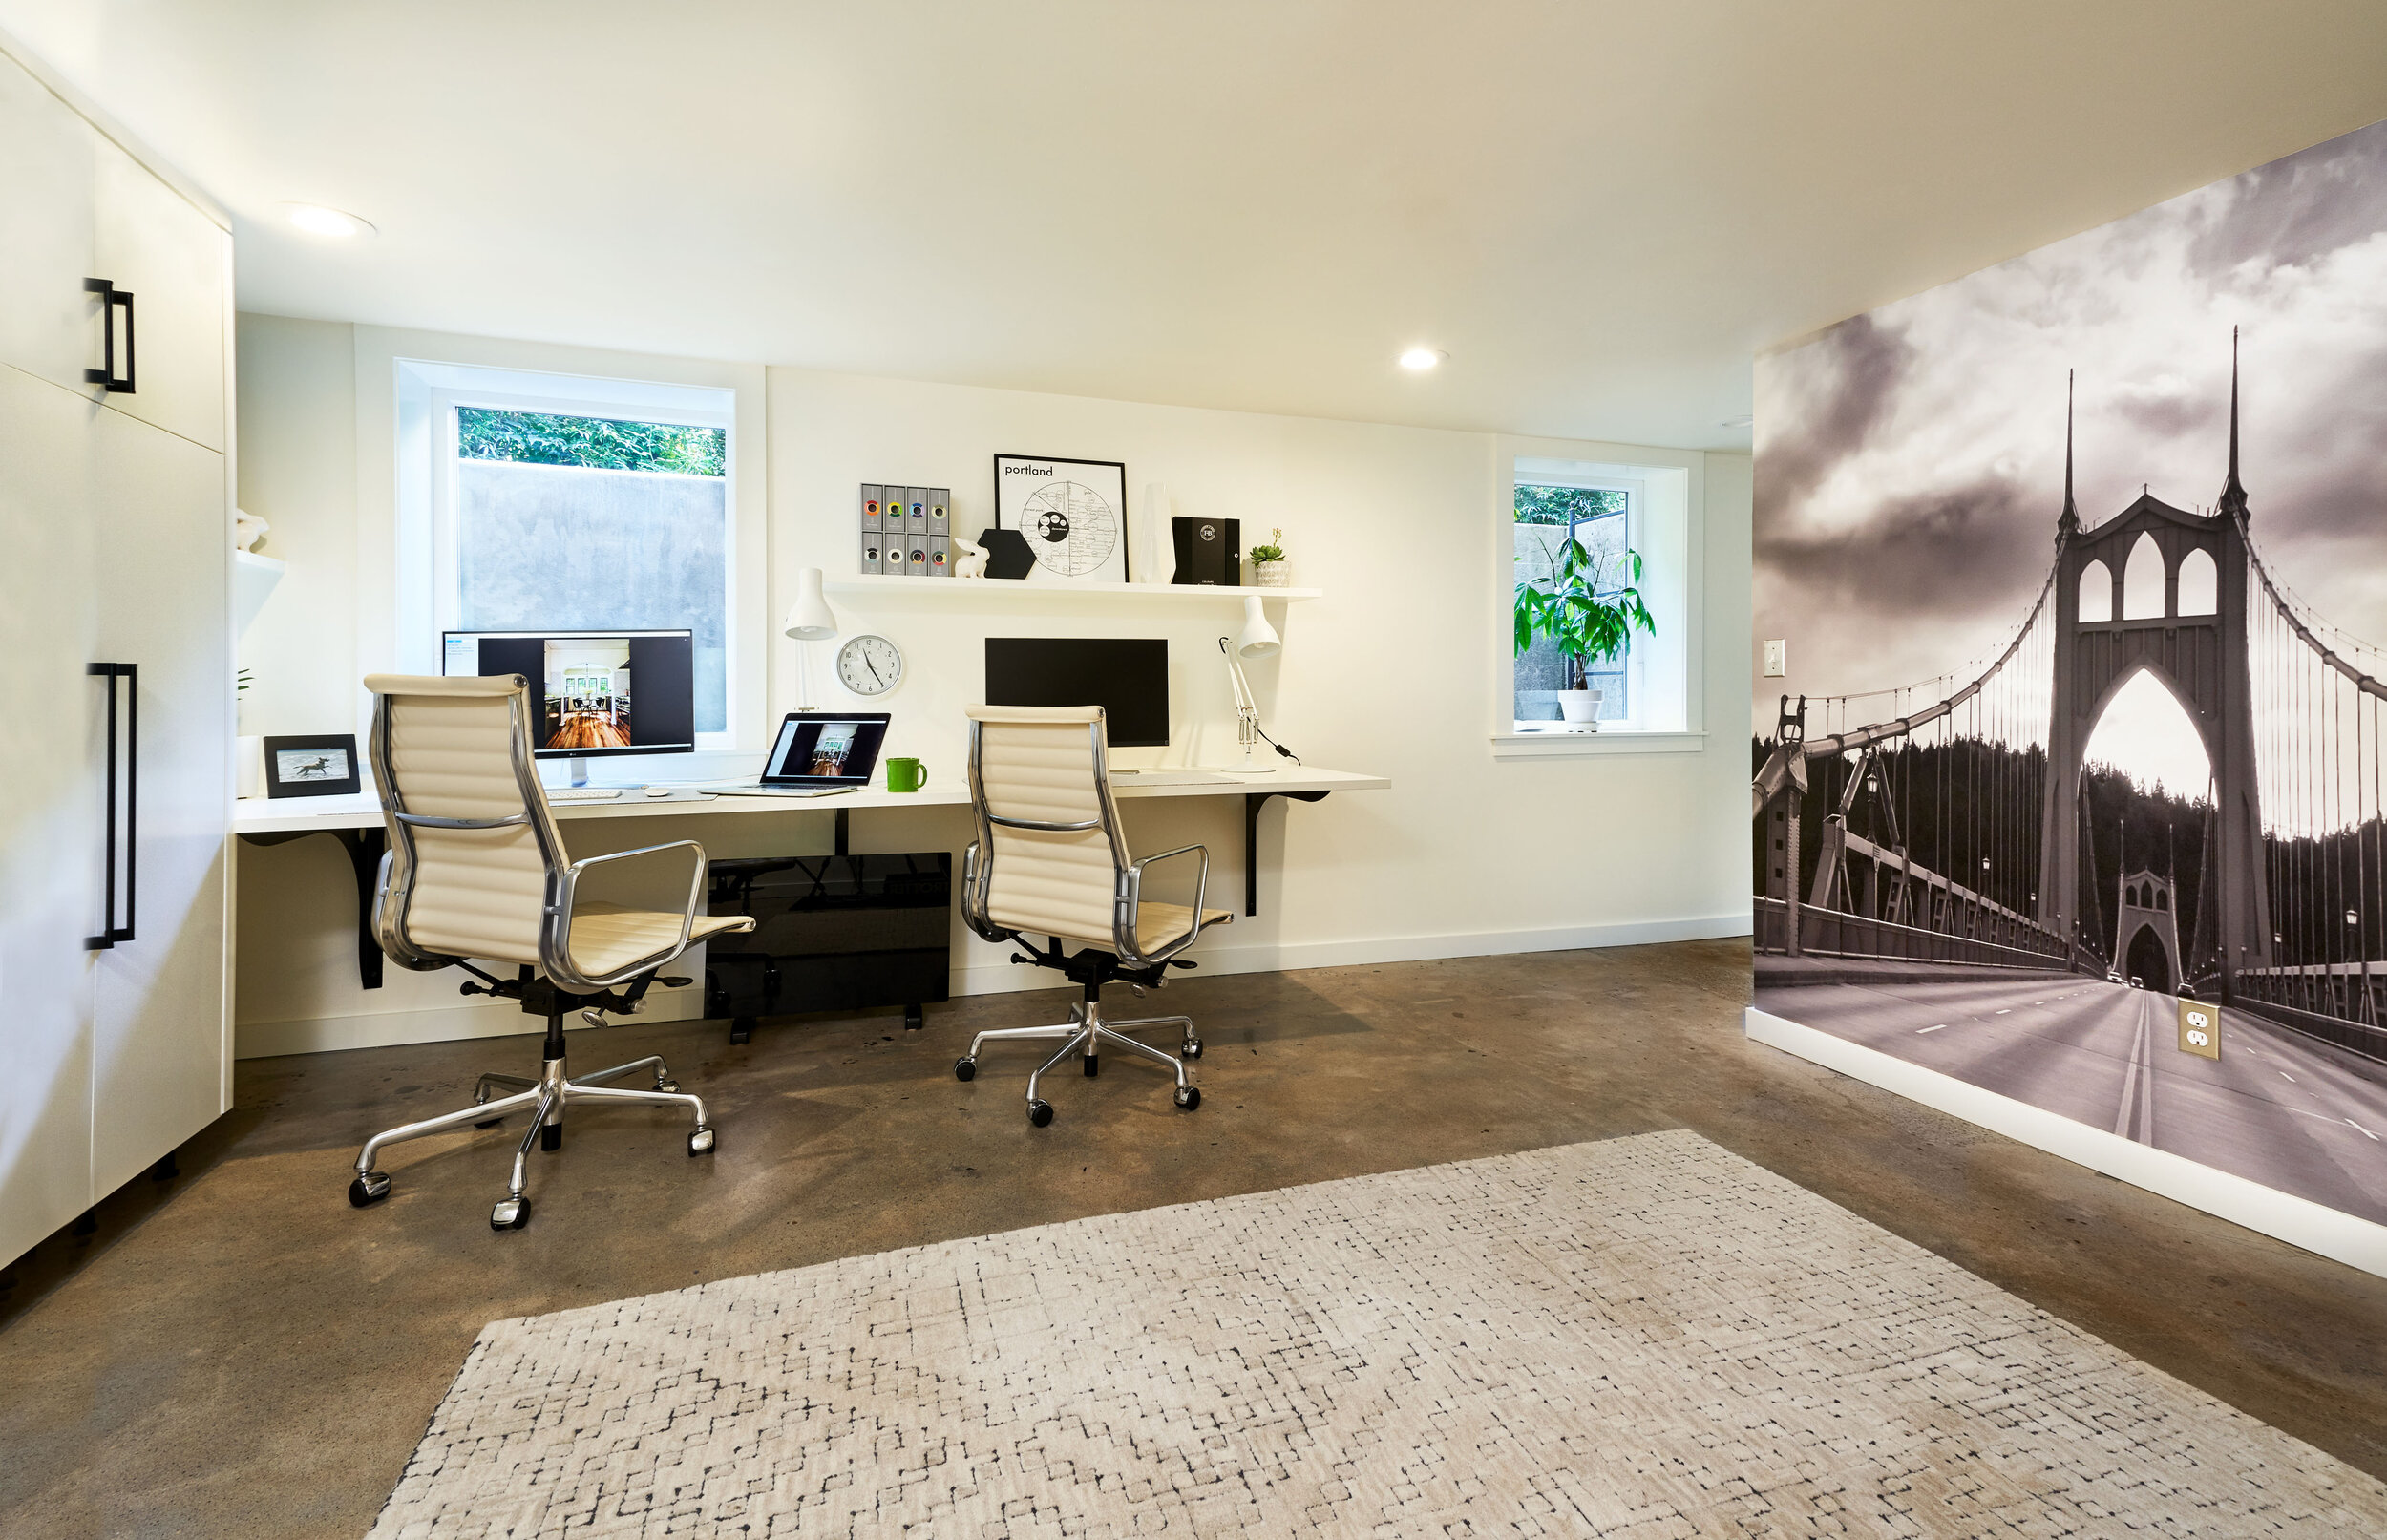 Industrial braces were used to create the open desk area. Custom wallpaper adorns the office wall.  